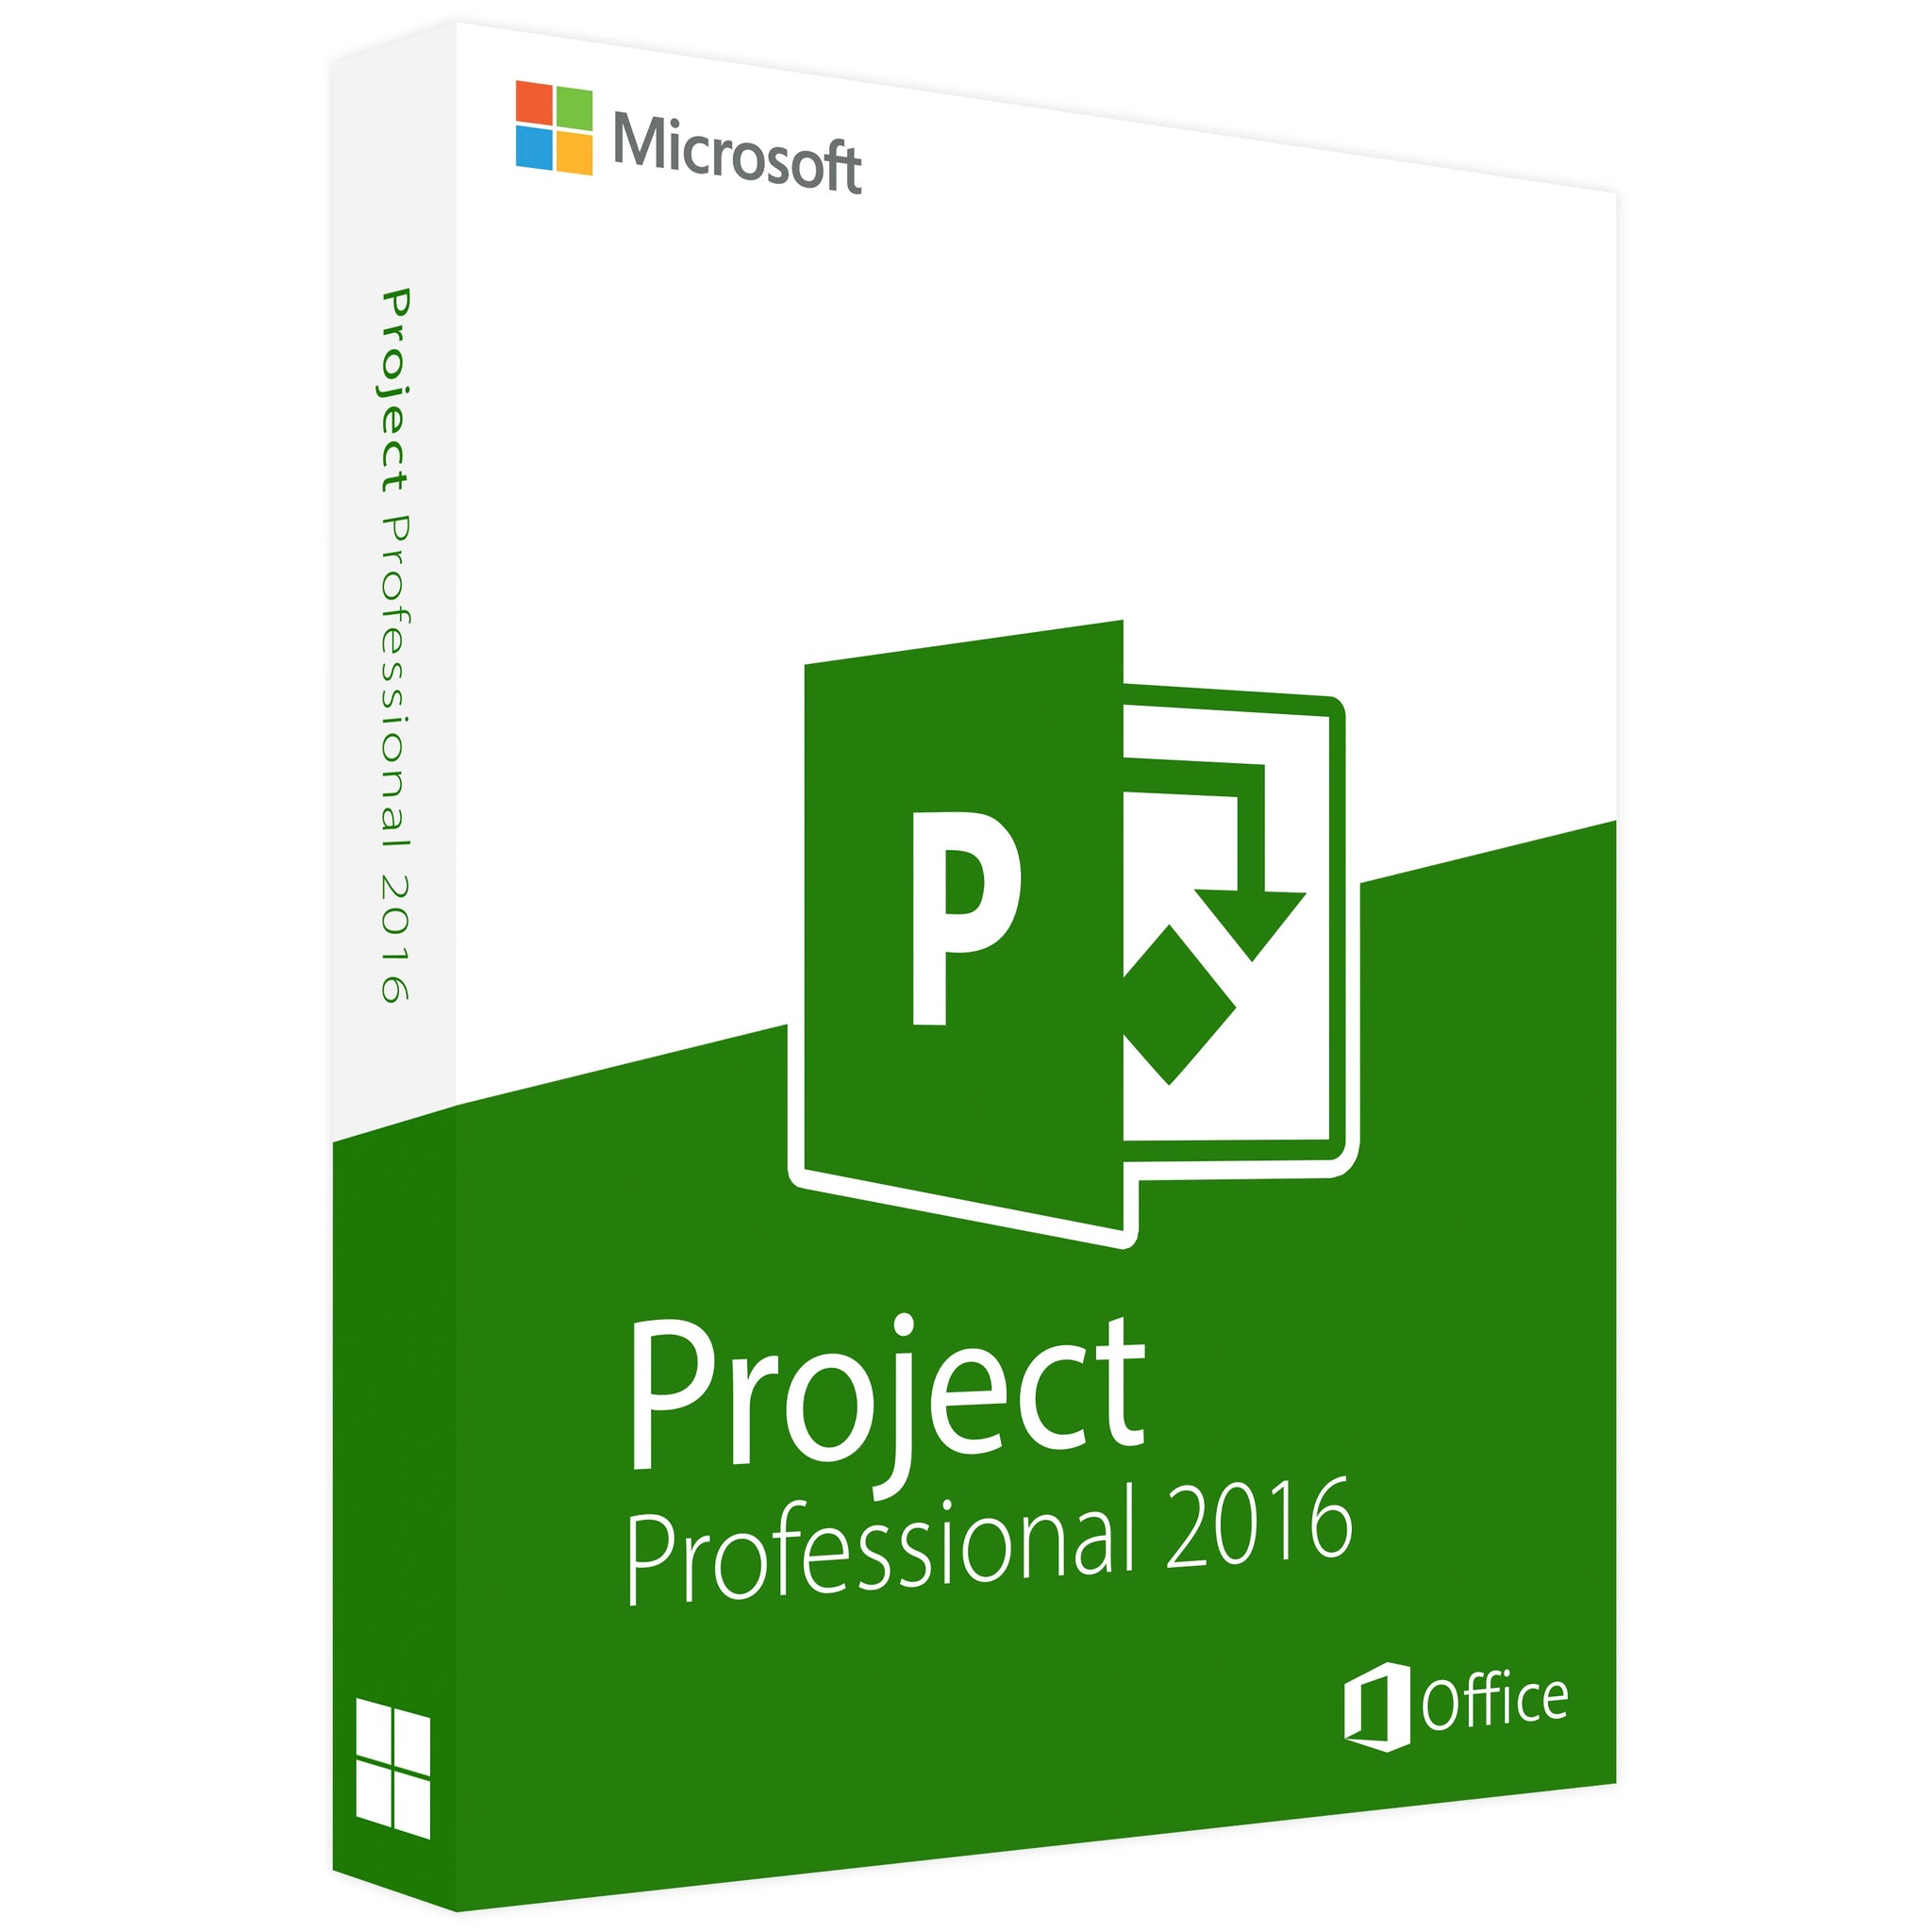 Microsoft Project 2016 Professional - Lifetime License Key for 1 PC